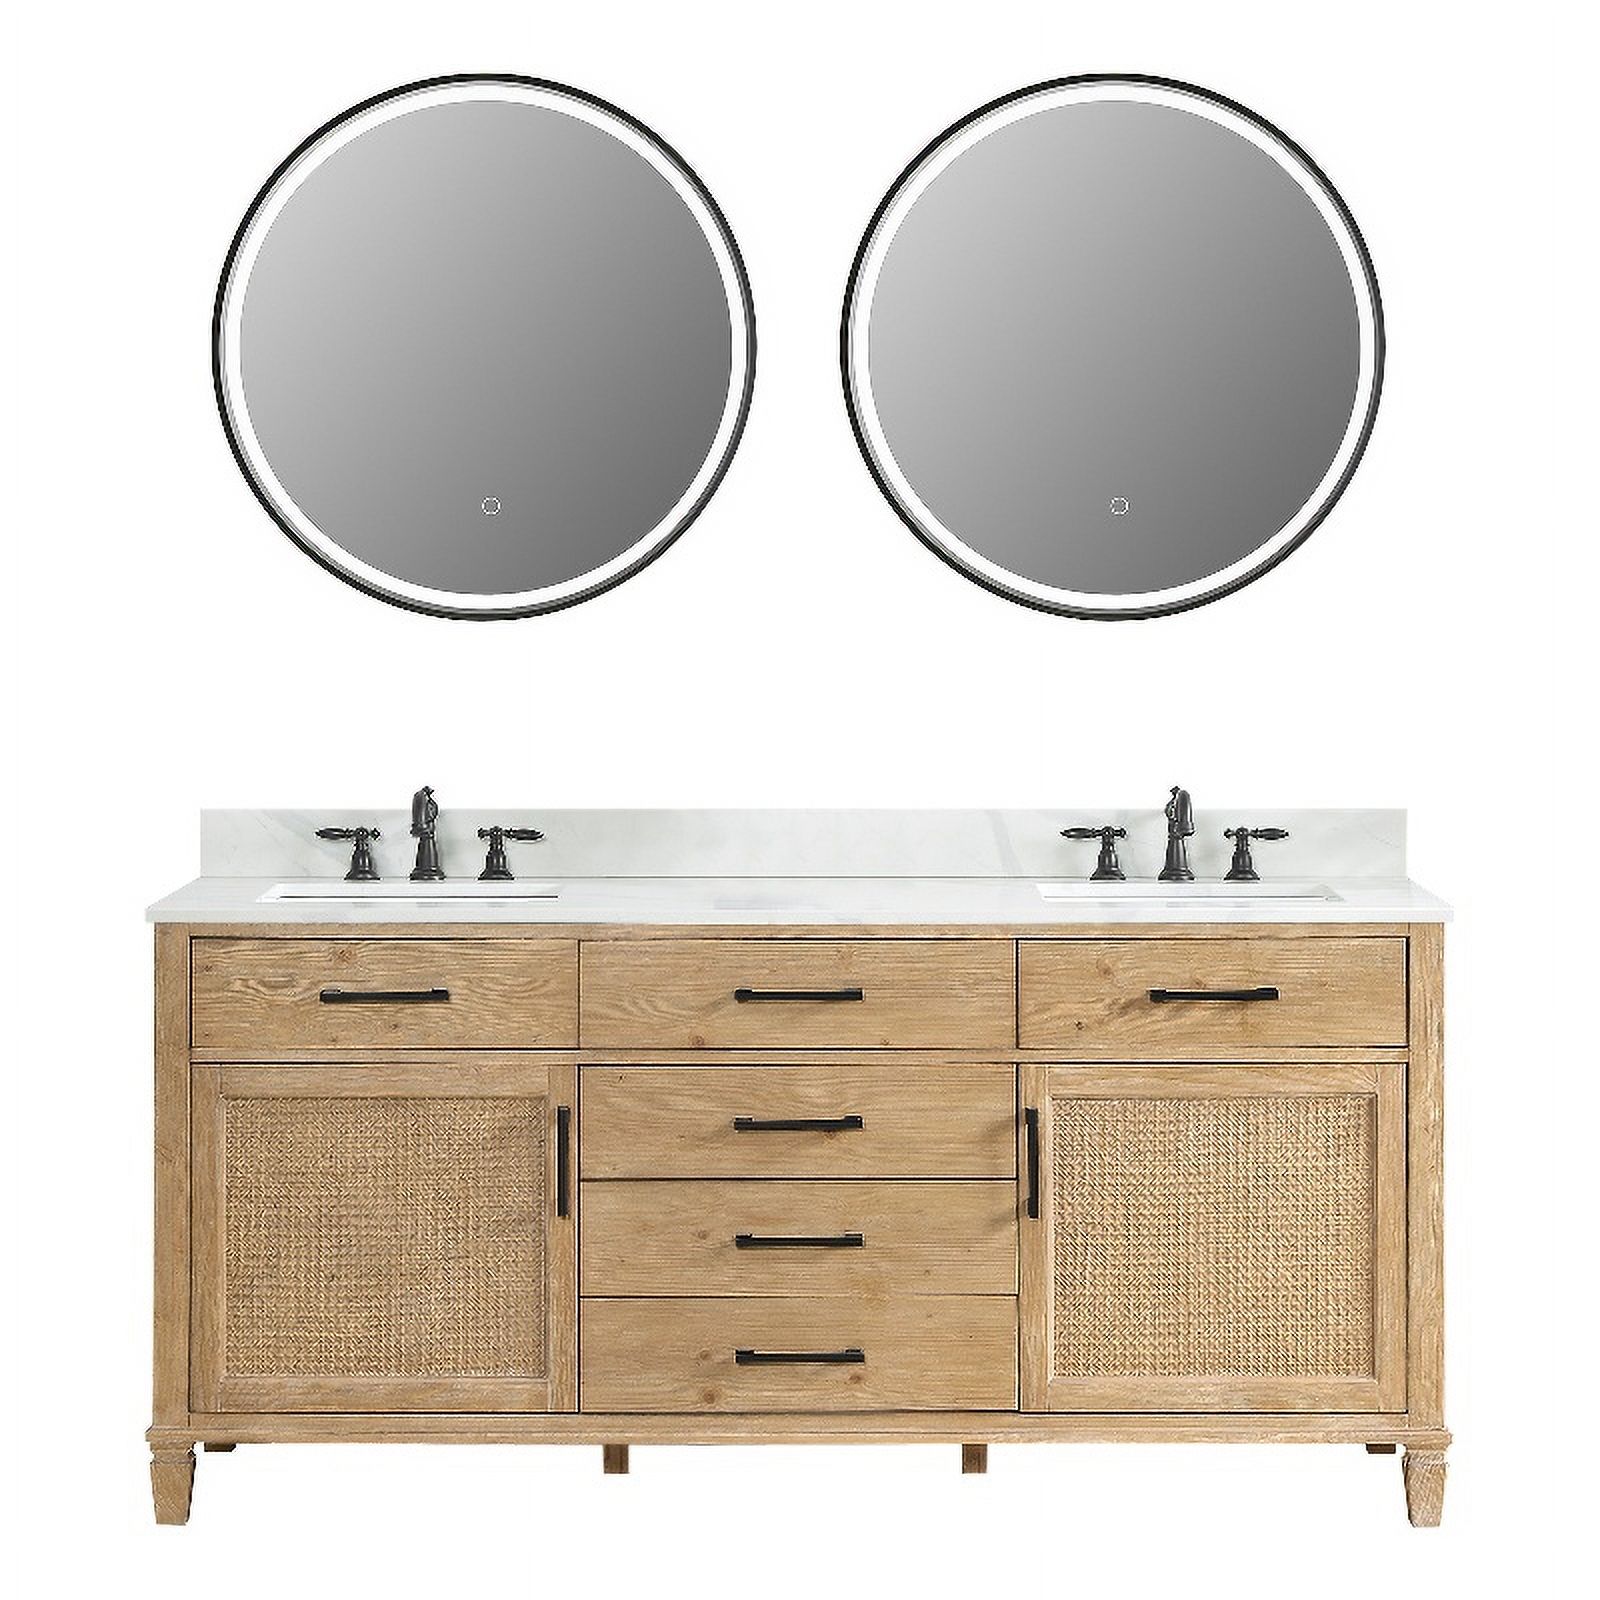 Issac Edwards Collection 60" Double Bathroom Vanity in Weathered Fir with Calacatta White Quartz Stone Countertop without Mirror